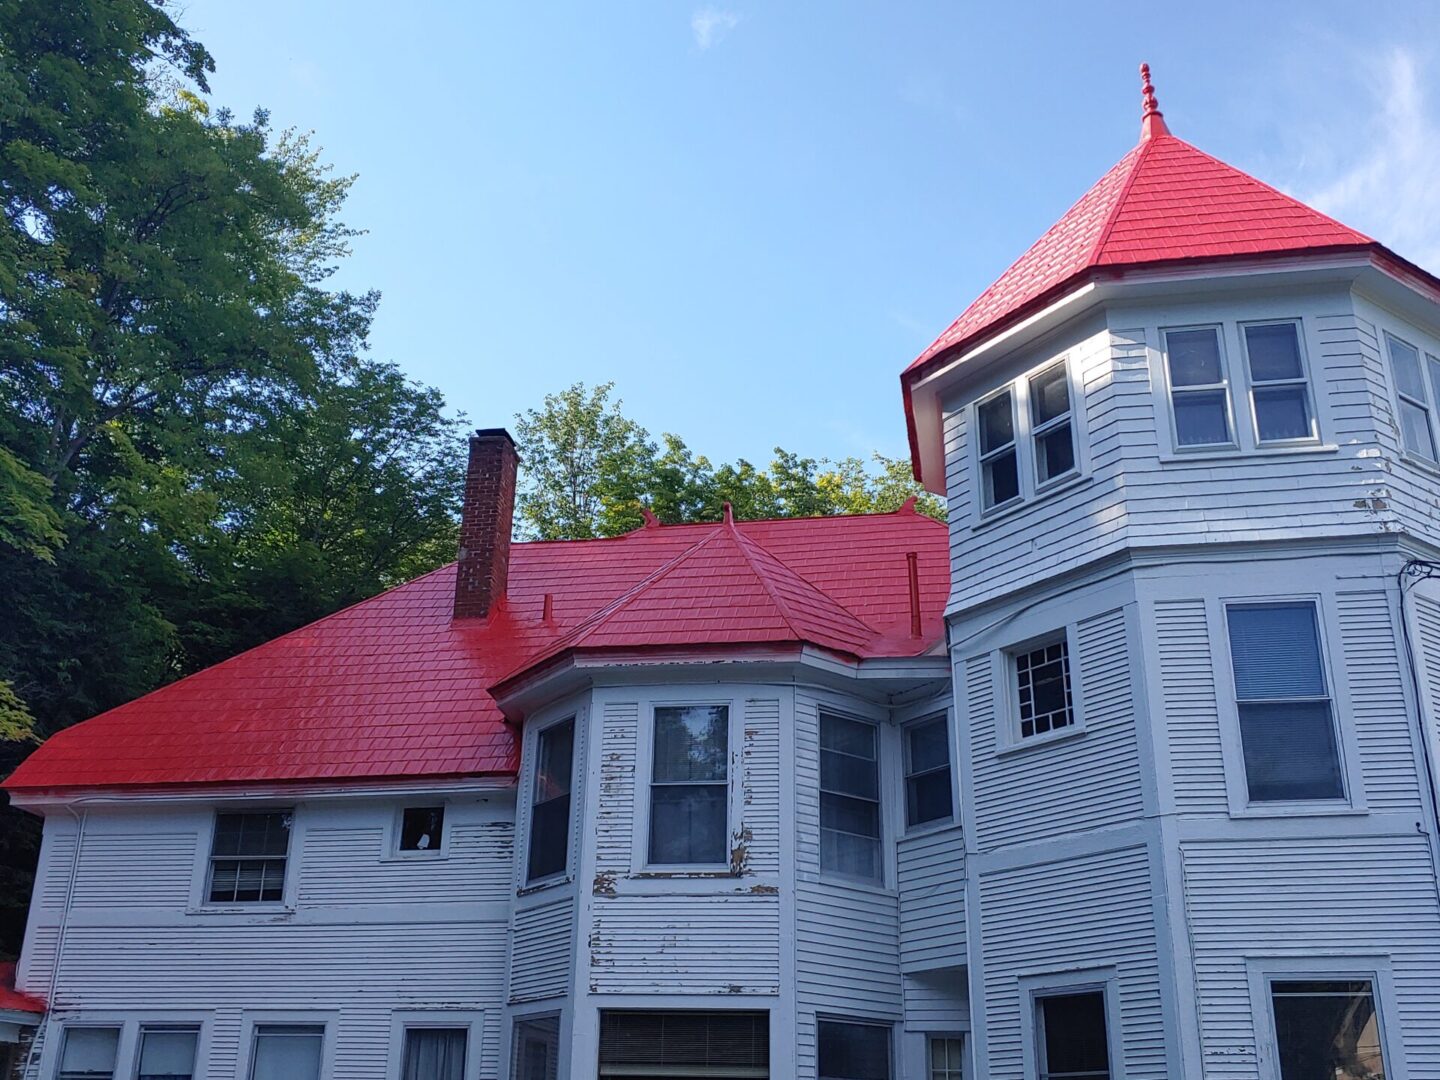 A large white house with red roof and windows.